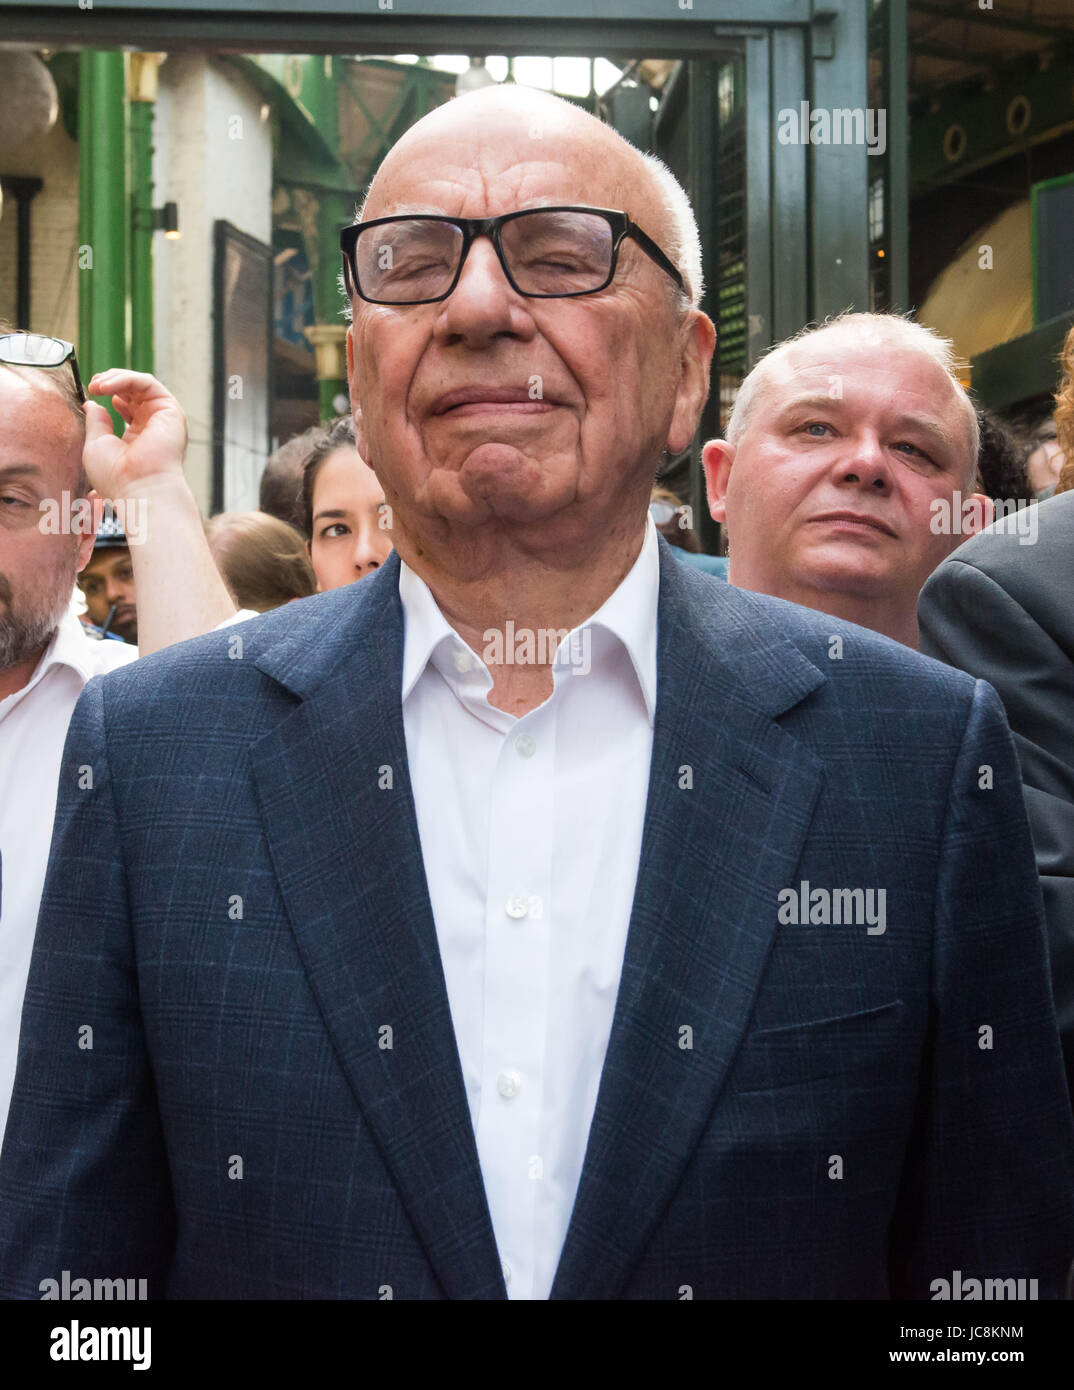 London, UK. 14th June, 2017. Rupert Murdoch at Borough Market as it re-opens to the public following the terrorist attack. Borough Market open to the public following 3rd June terror attack. Eight people were killed and at least 48 injured in terror attacks on London Bridge and Borough Market. Credit: Michael Tubi/Alamy Live News Stock Photo